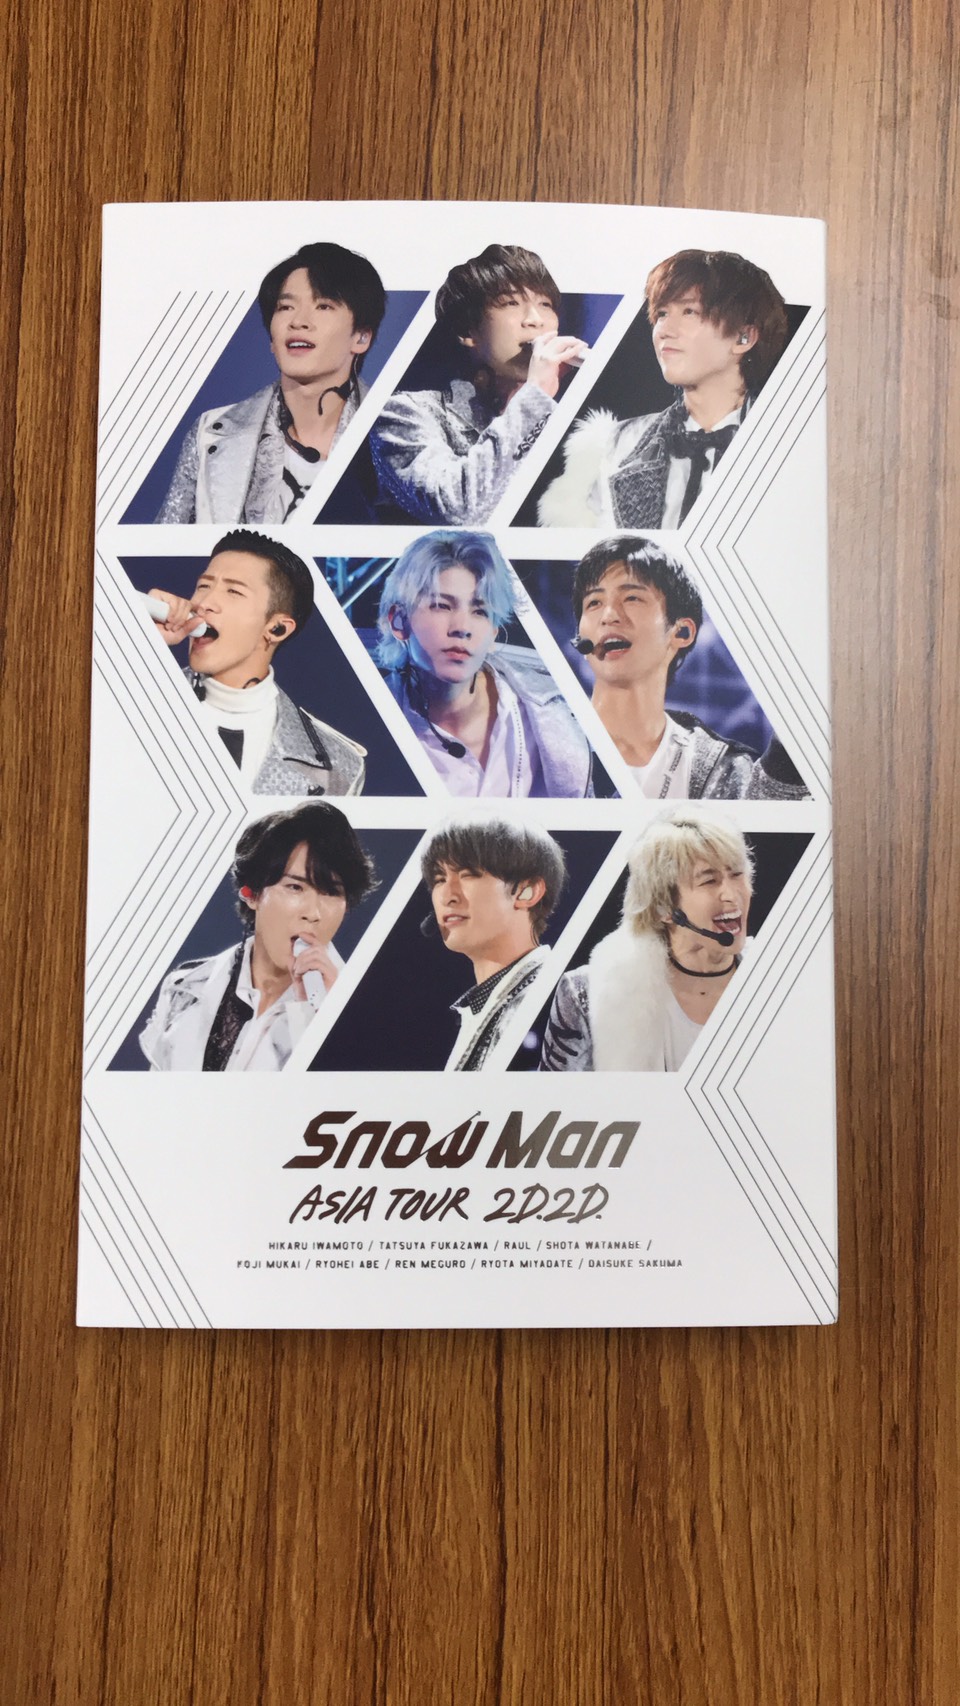 【CD/DVD】4/2★Snow Man ASIA TOUR 2D.2D. お持ち頂きました！★ - 万代書店 伊勢崎店